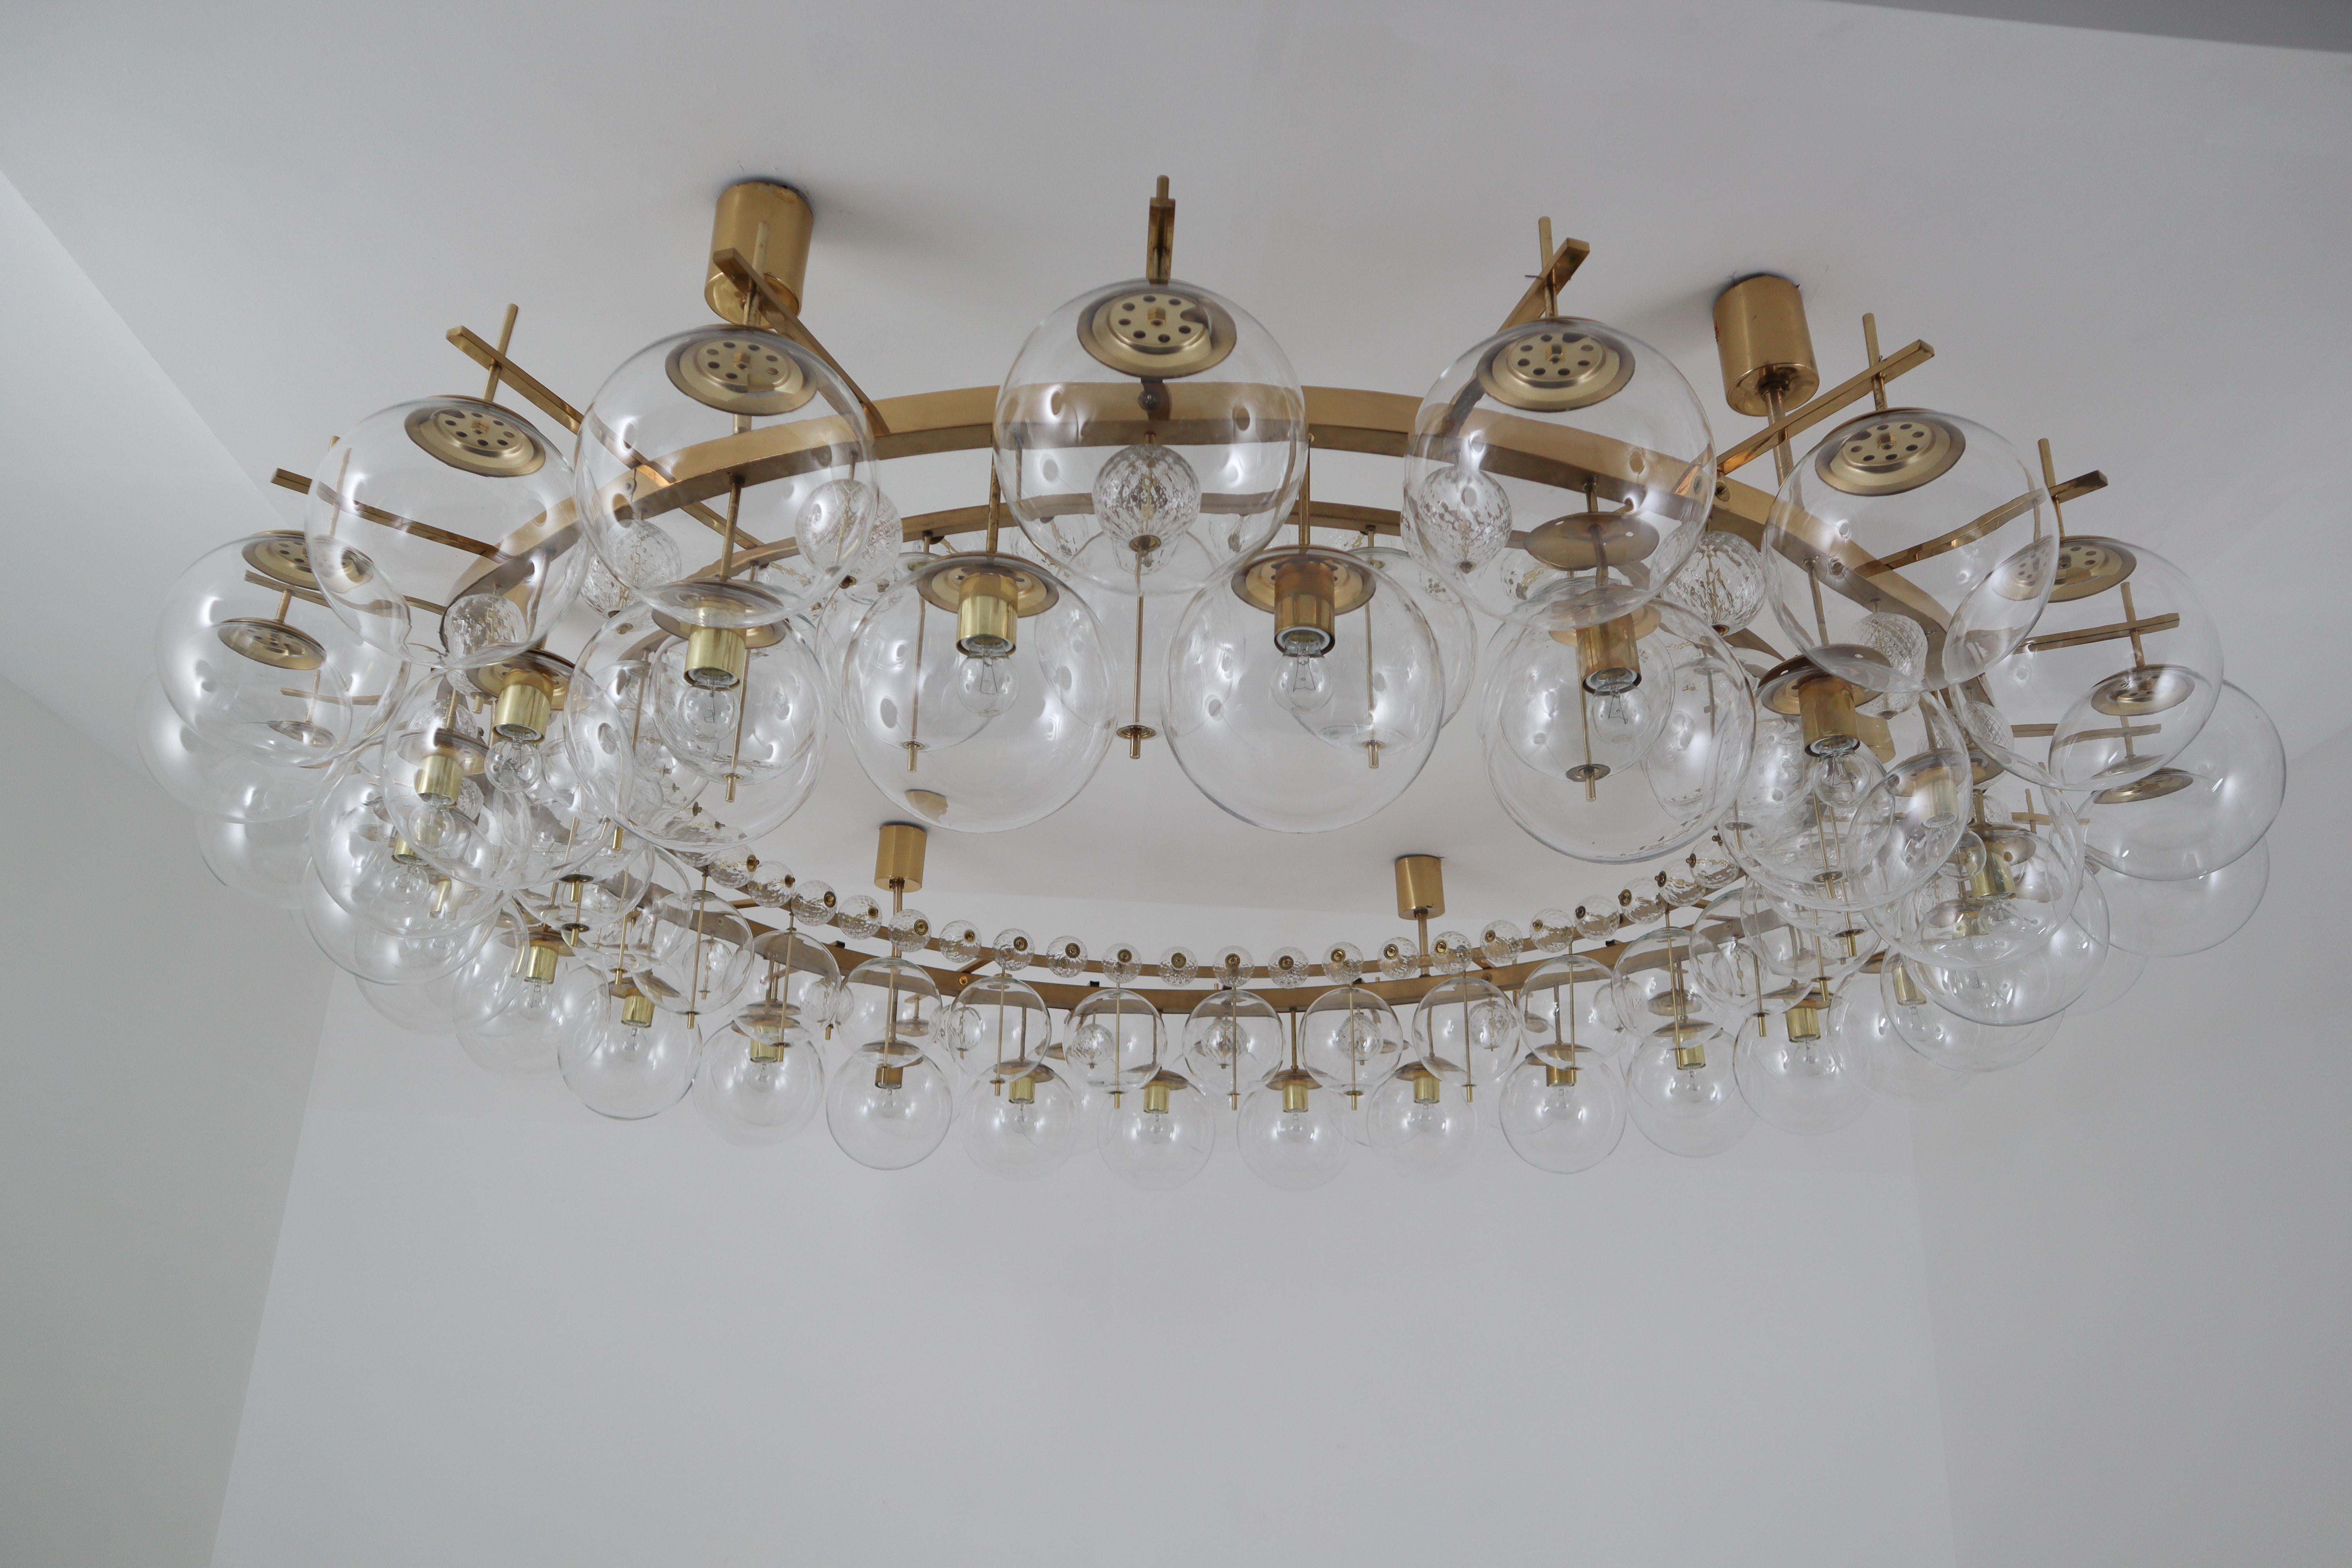 Two Extremely Large Hotel Chandeliers with Brass Fixture and Hand-Blowed Glass 5